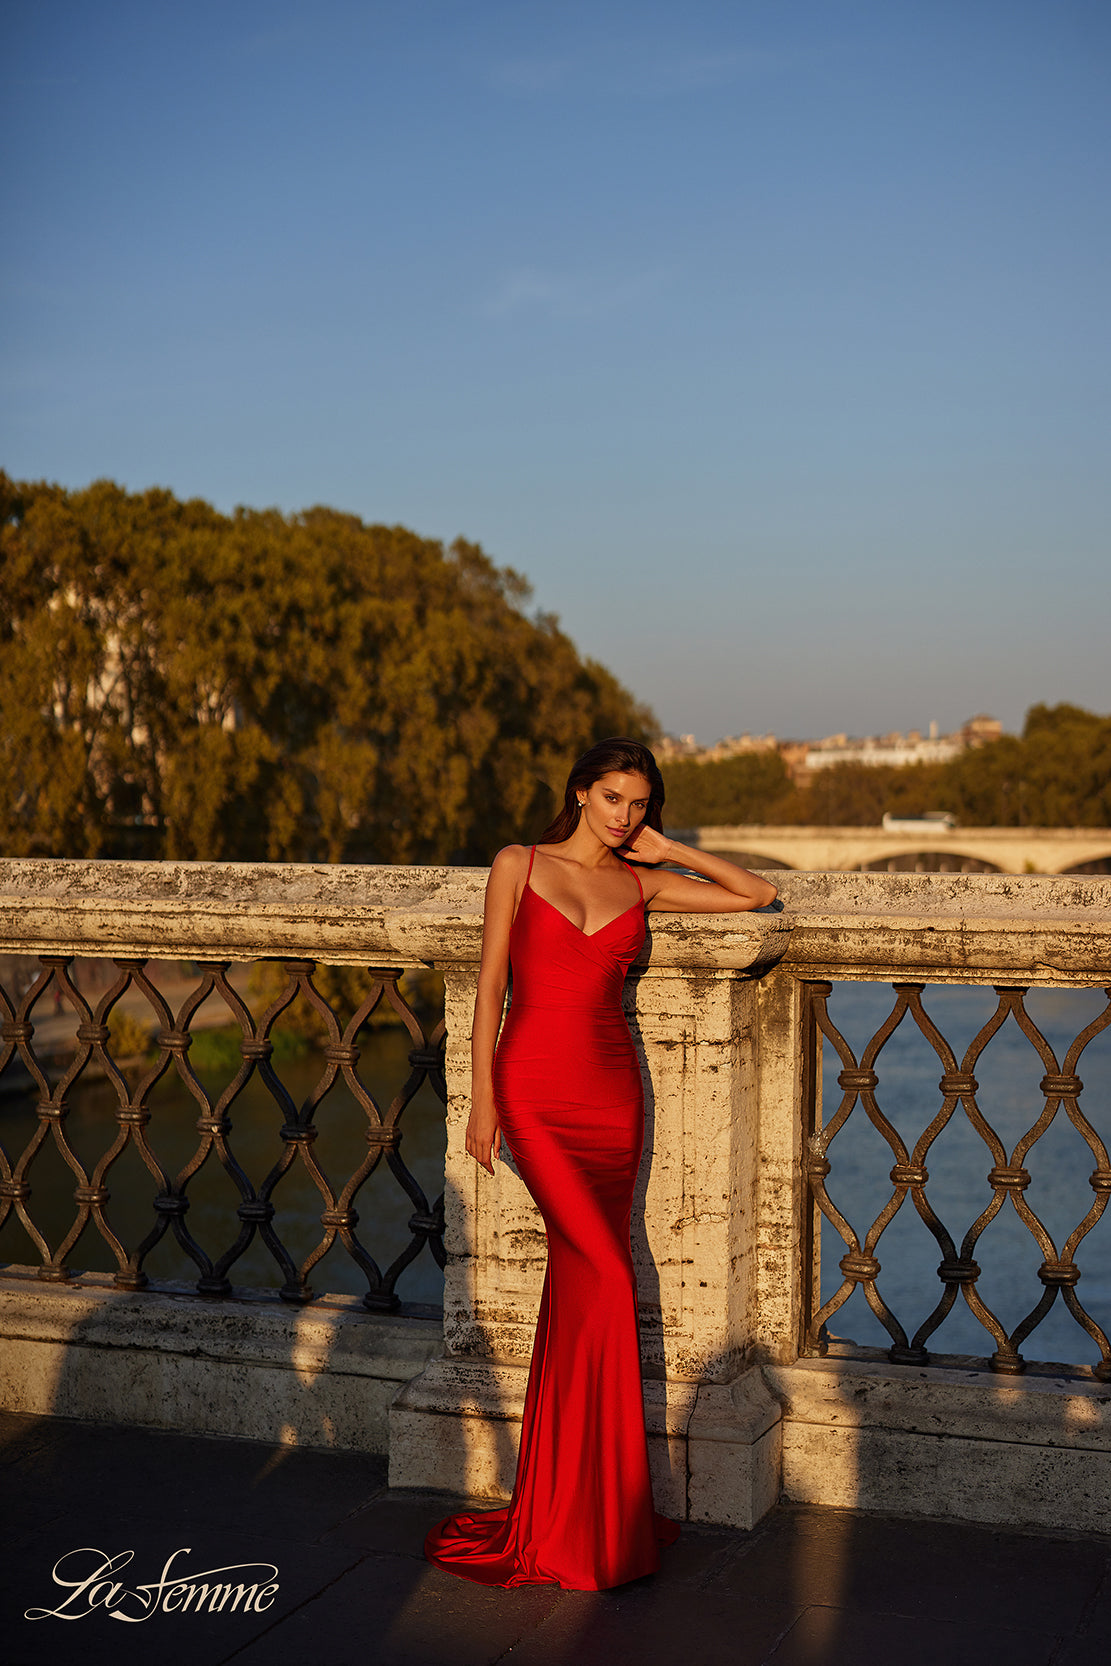 La Femme 31618 Chic Fitted Long Jersey Prom Dress - A sophisticated prom dress with a chic fitted silhouette, ruching detail, criss-cross style bodice, and an open back with a lace-up tie. Model is wearing the dress in the color red.